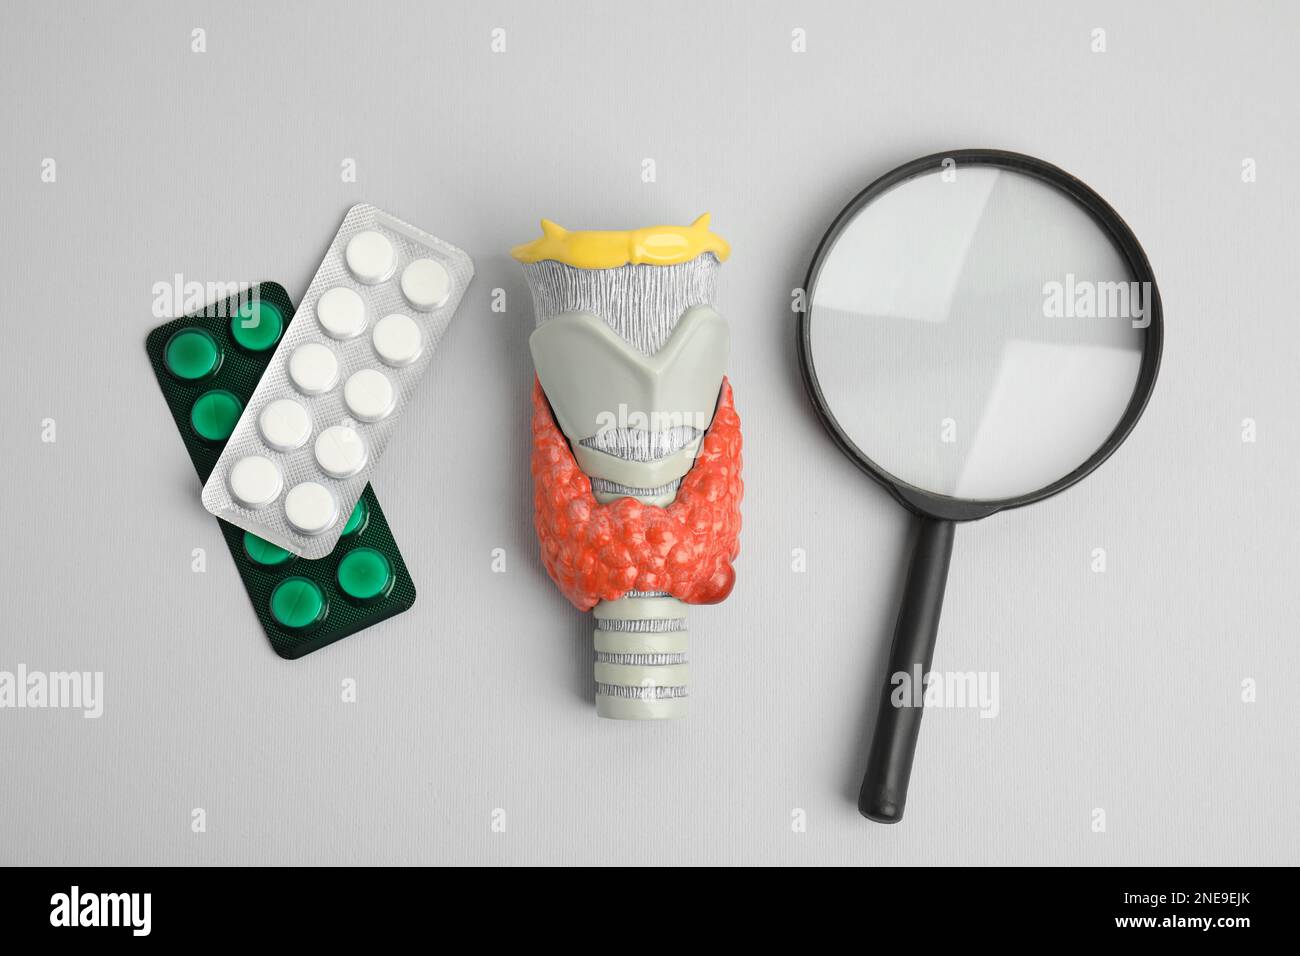 Plastic model of thyroid with tumor, pills and magnifying glass on grey background, flat lay Stock Photo